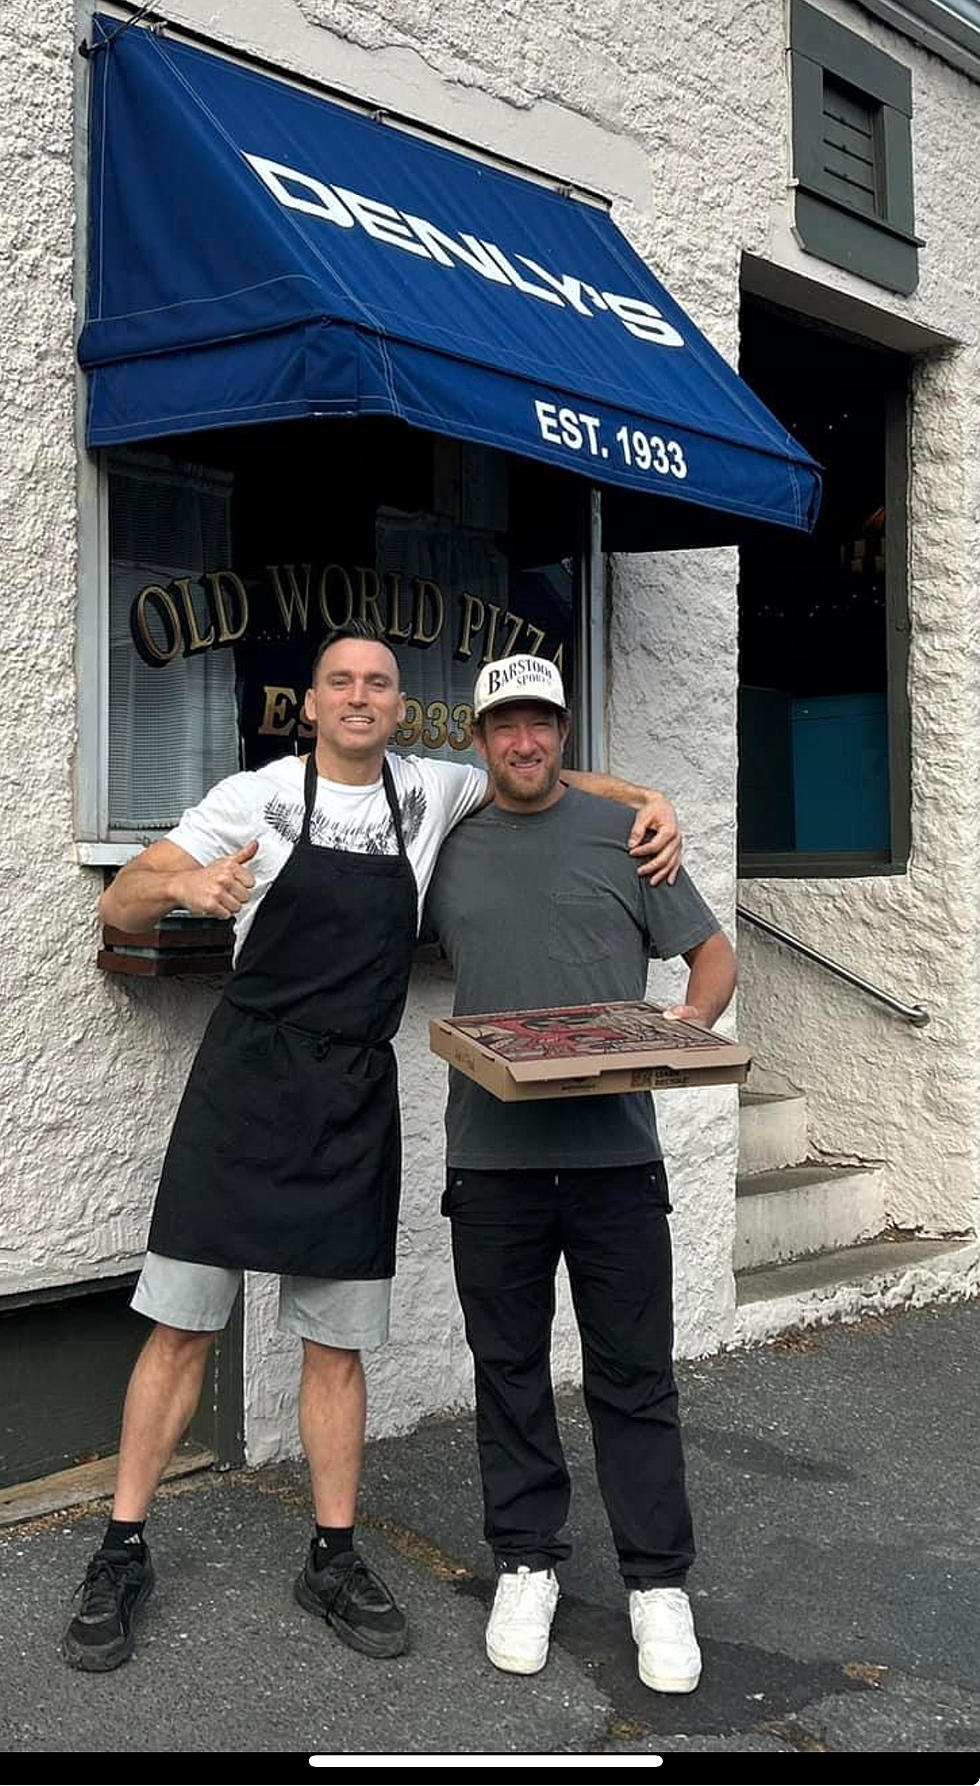 The 20 Best Pizza Shops In MA (Updated) According To Dave Portnoy